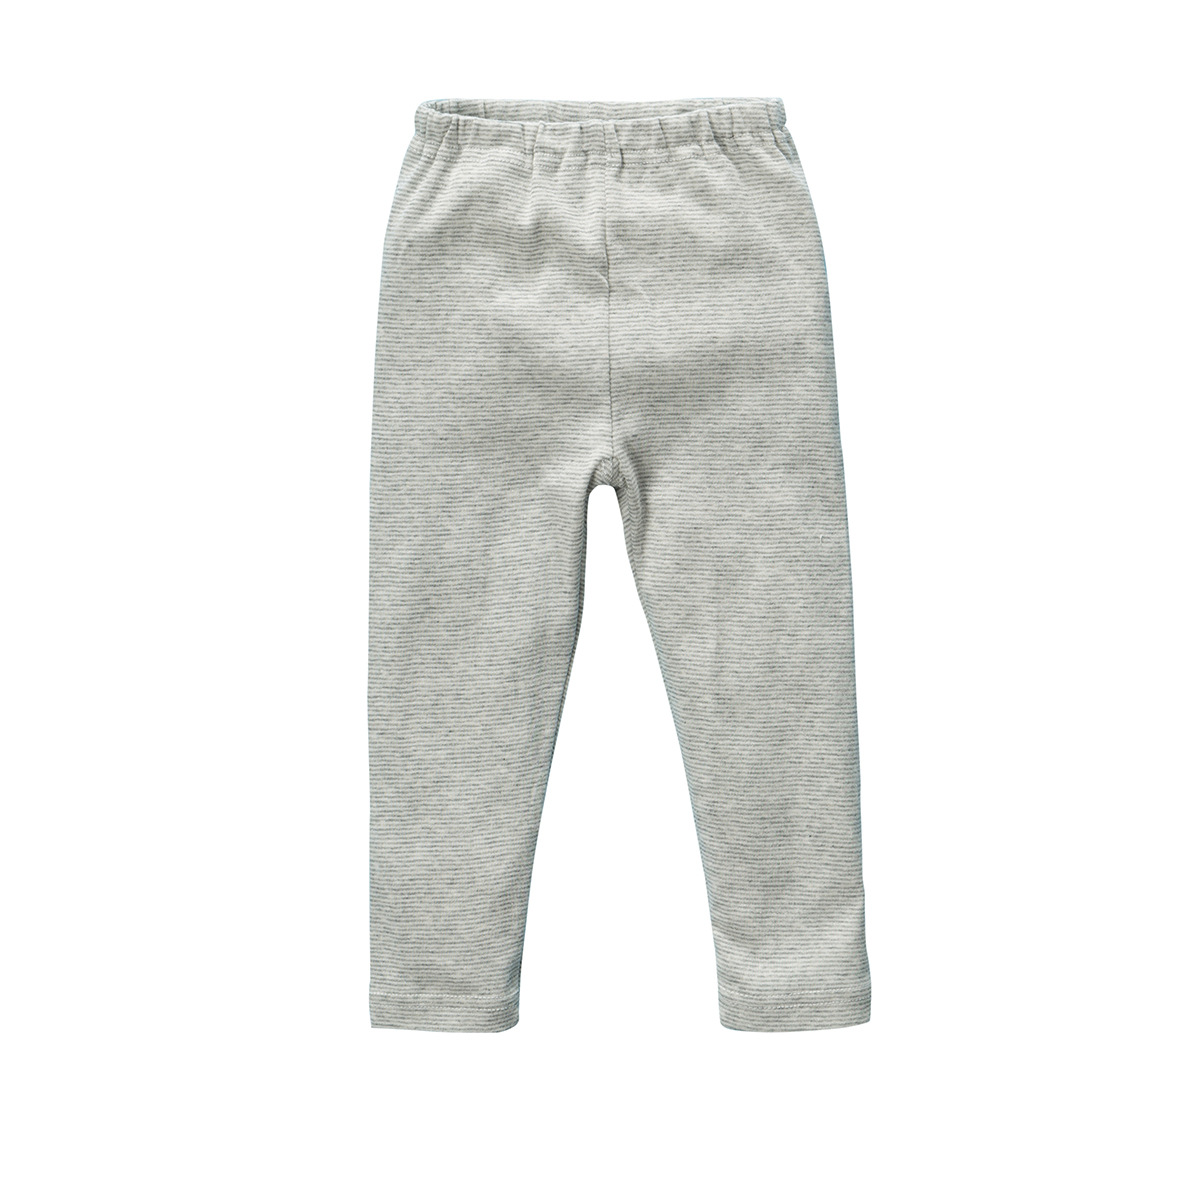 Pants of new design, high quality for children